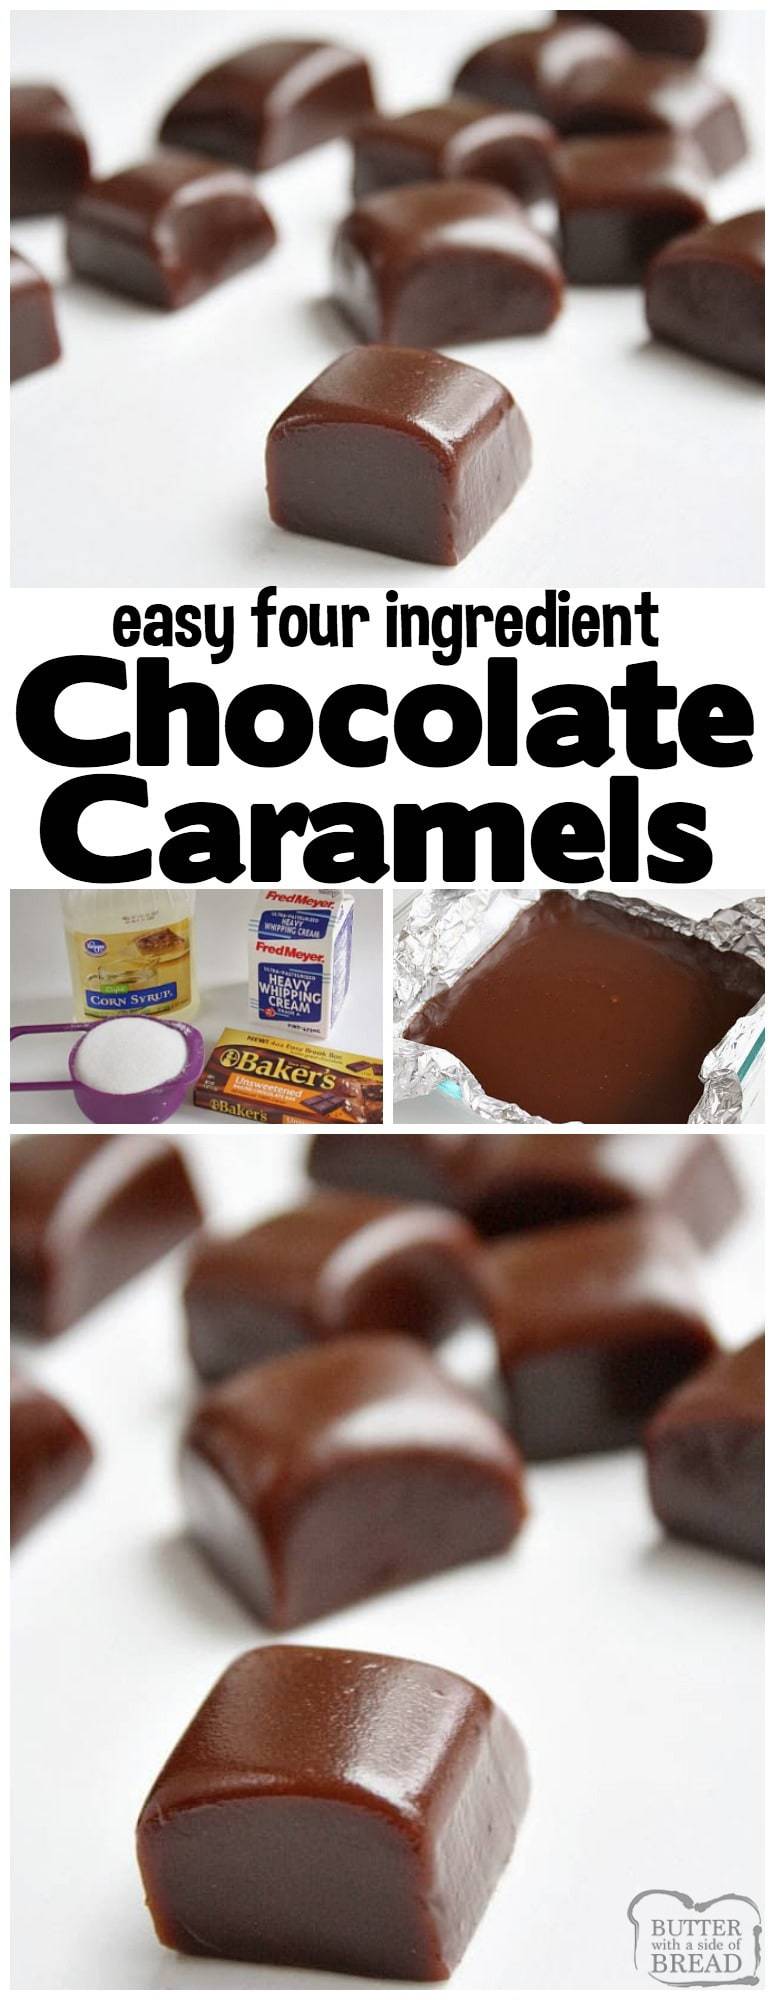 Chocolate Caramels are soft, chewy 4-ingredient homemade caramels with the amazing addition of chocolate! Perfect holiday treats that are delicious & easy to make. Incredible #homemade #caramel #recipe with #chocolate from Butter With A Side of Bread #Christmas #candy #holidays